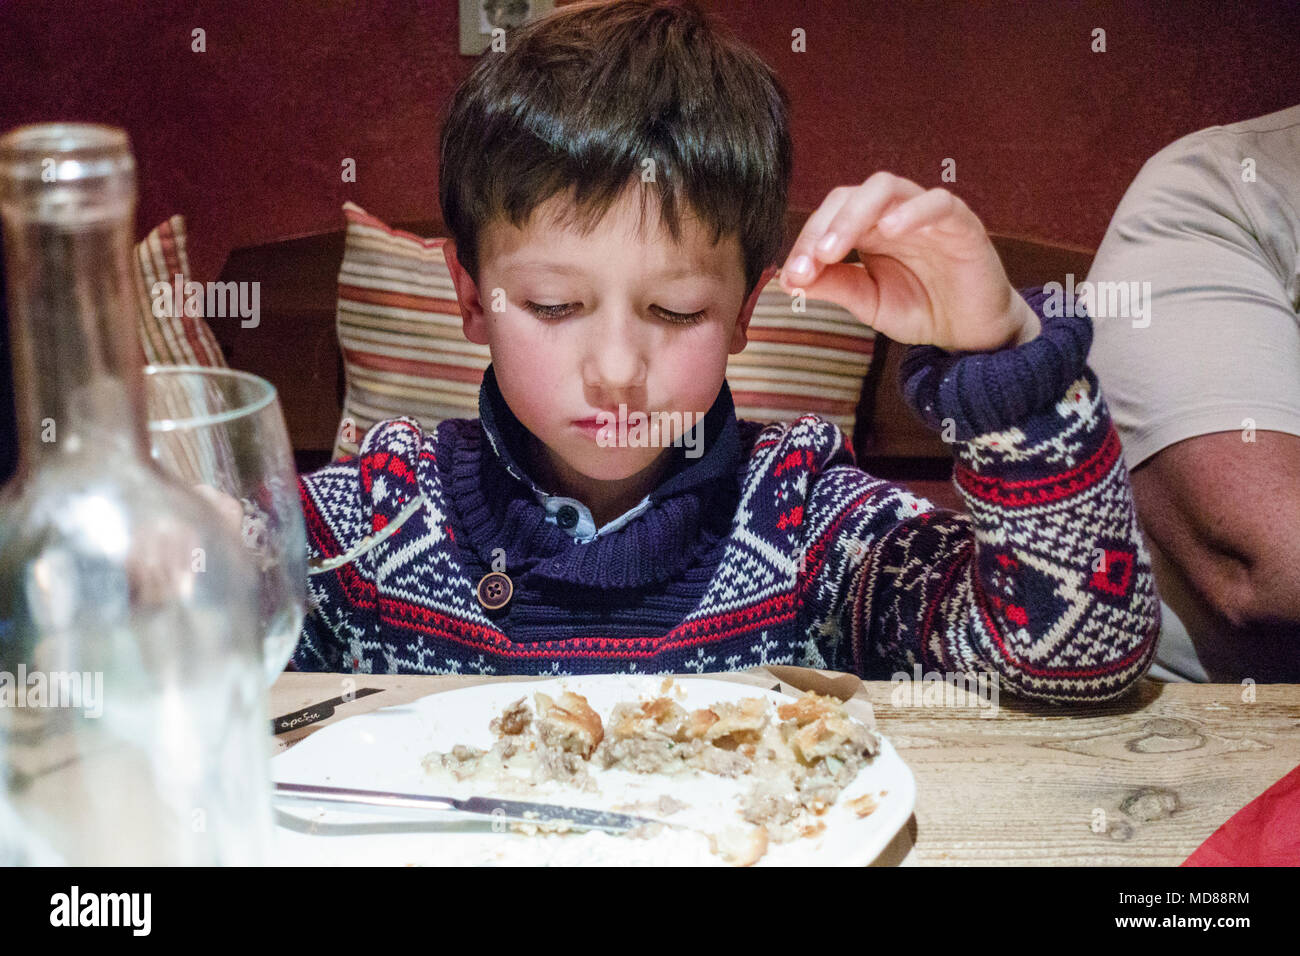 View of boy looking down at his meal, Greece Stock Photo